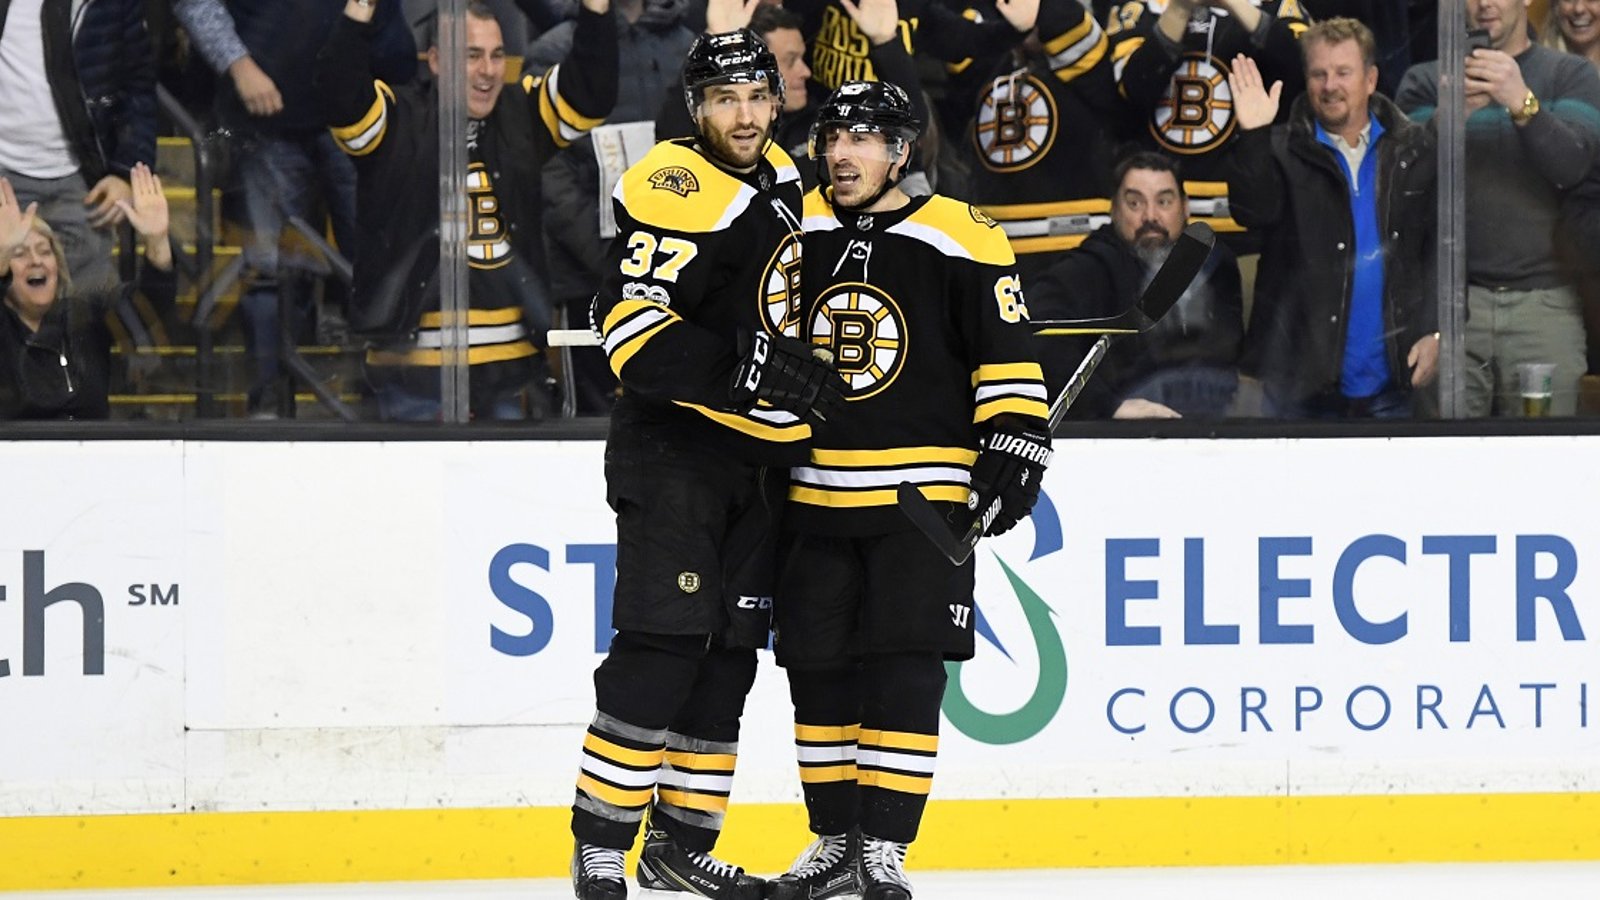 Bad news for Bergeron &amp; Marchand ahead of big game against the Habs.